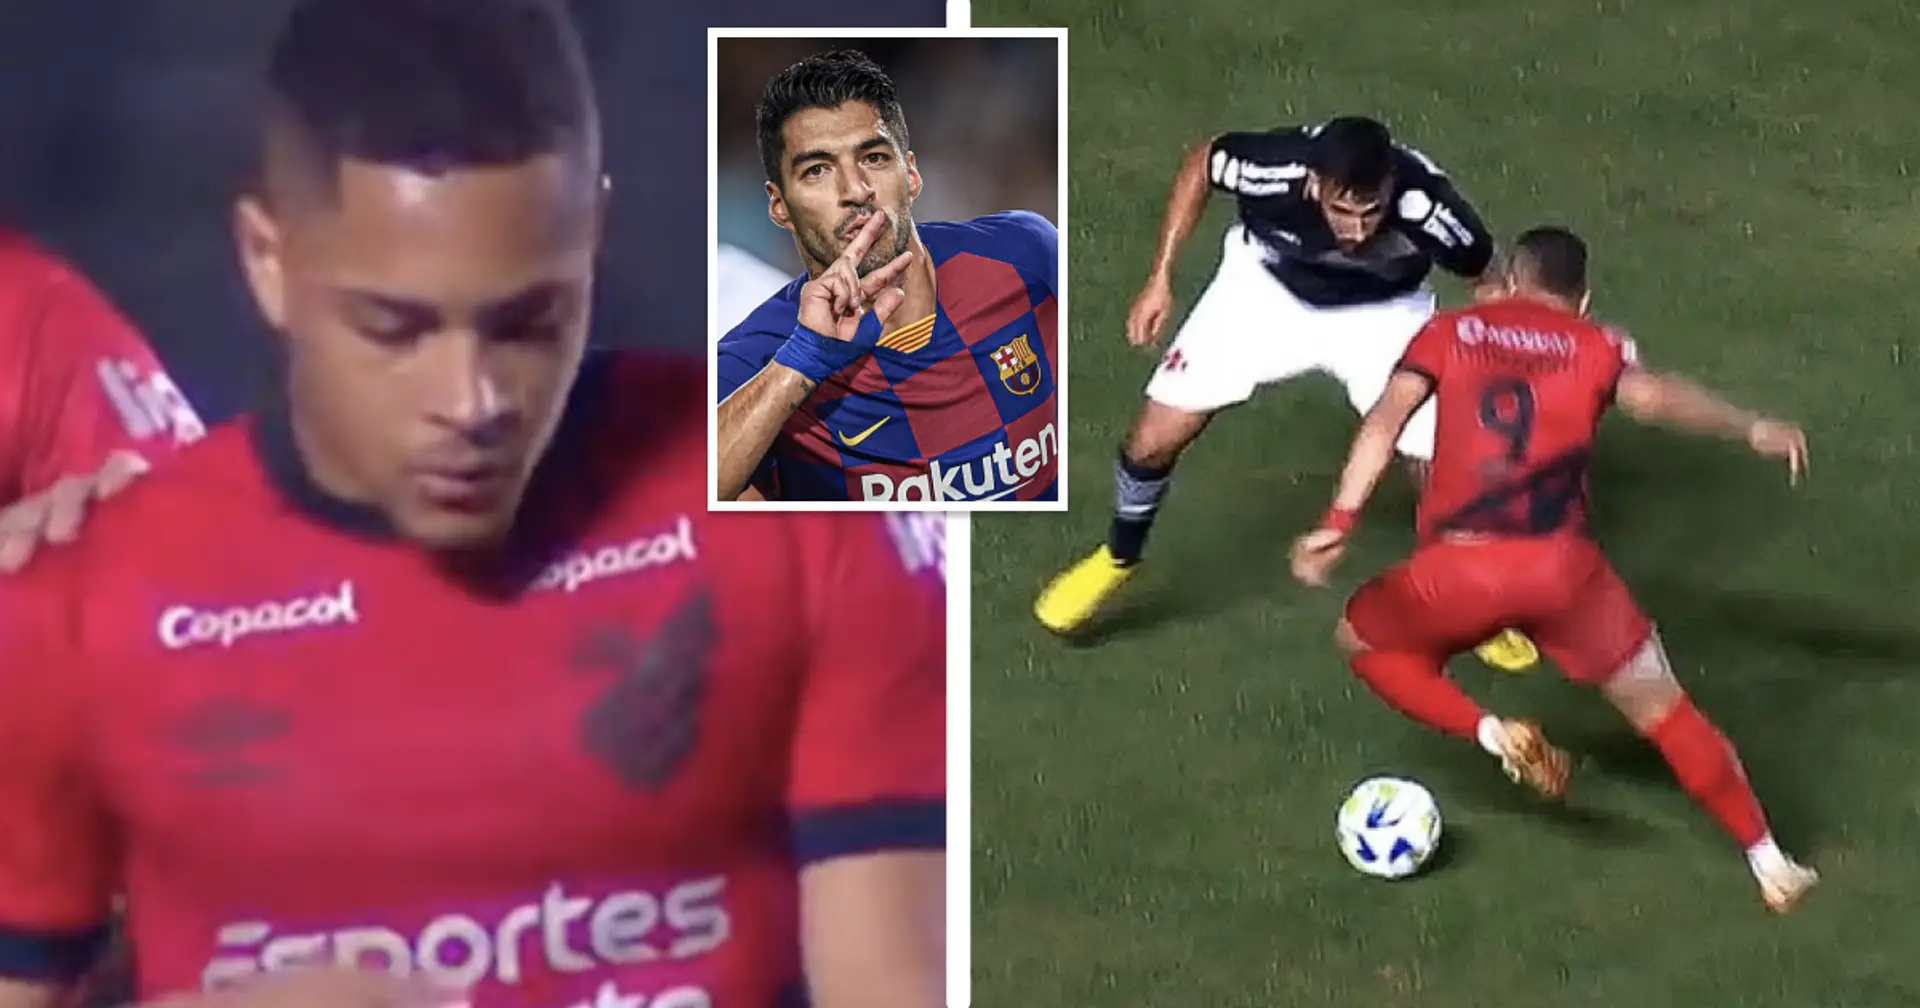 Fan spots one Vitor Roque ability that makes him look like Luis Suarez – not finishing